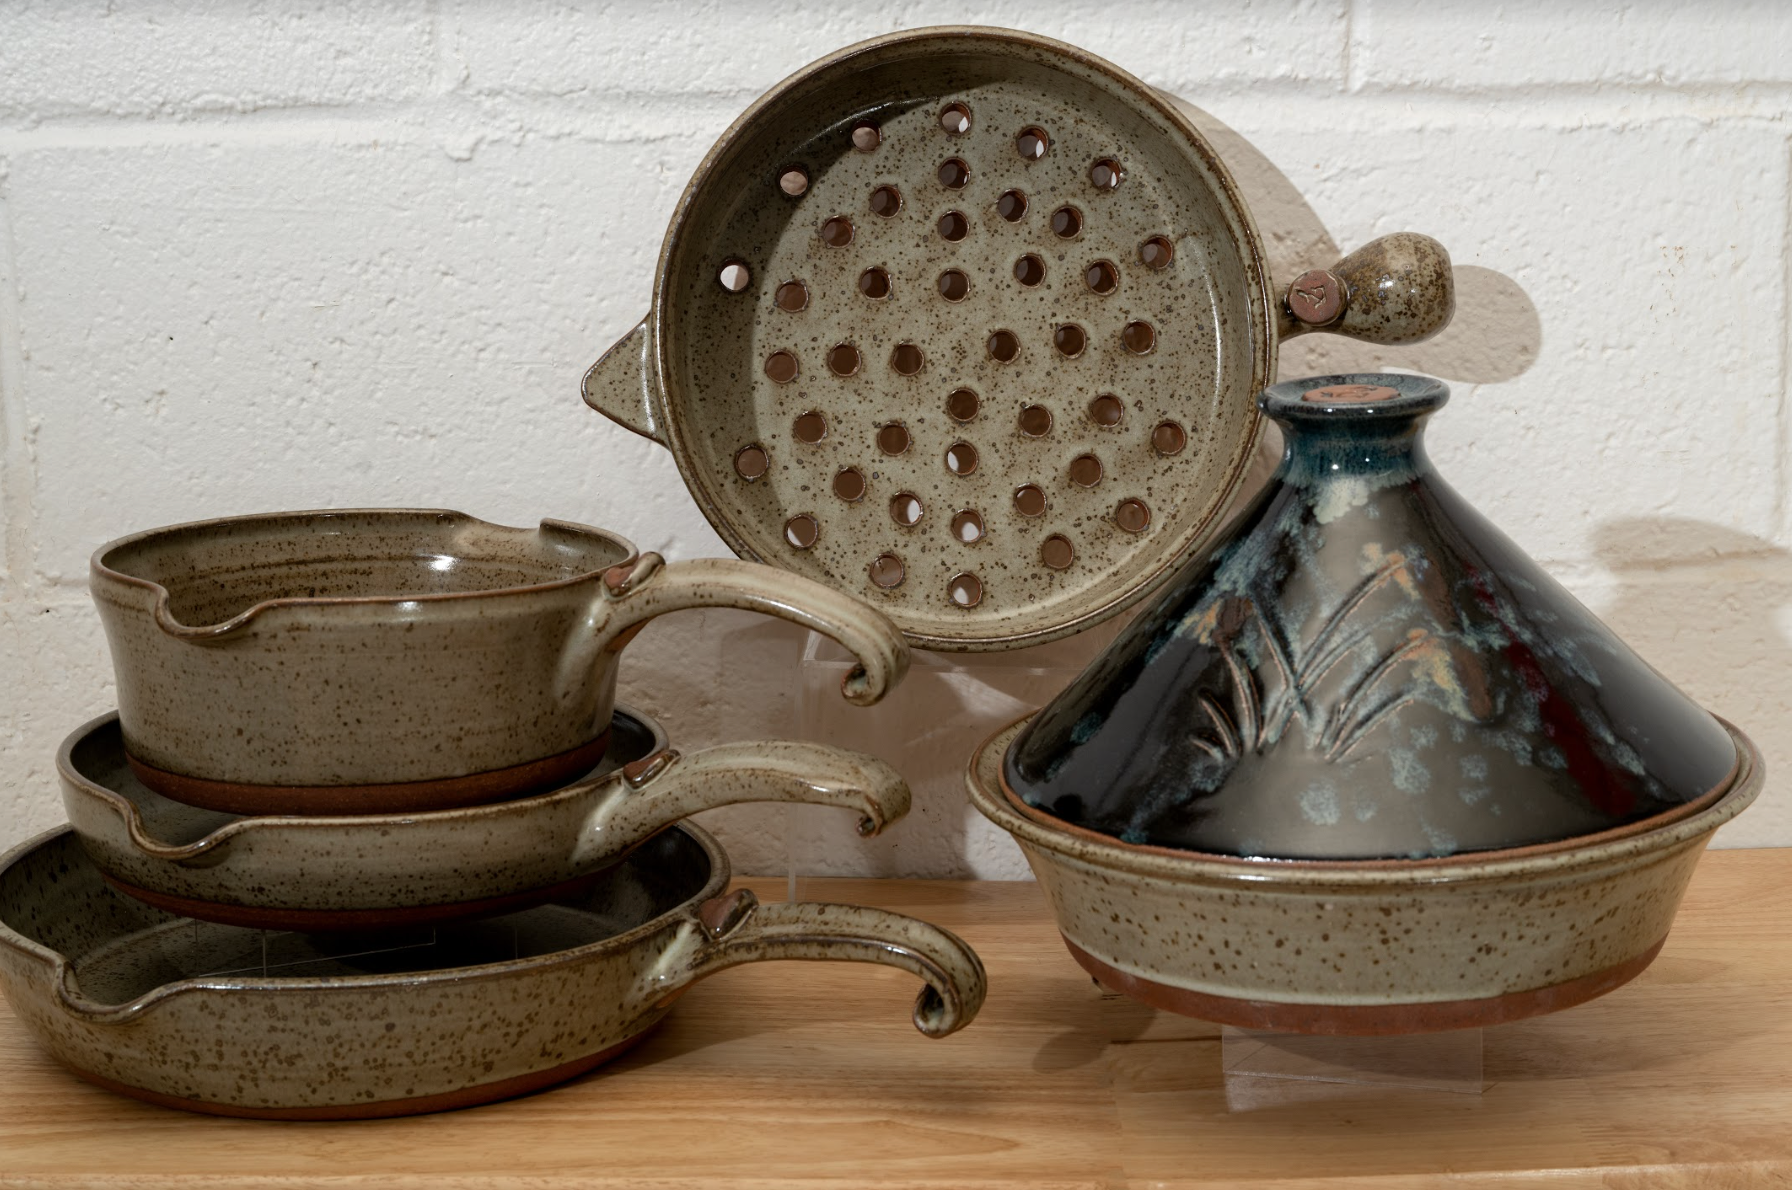 https://www.claycoyote.com/wp-content/uploads/2022/08/Clay-Coyote-Flameware-5-peice-set-with-Midnight-Garden-Tagine.png